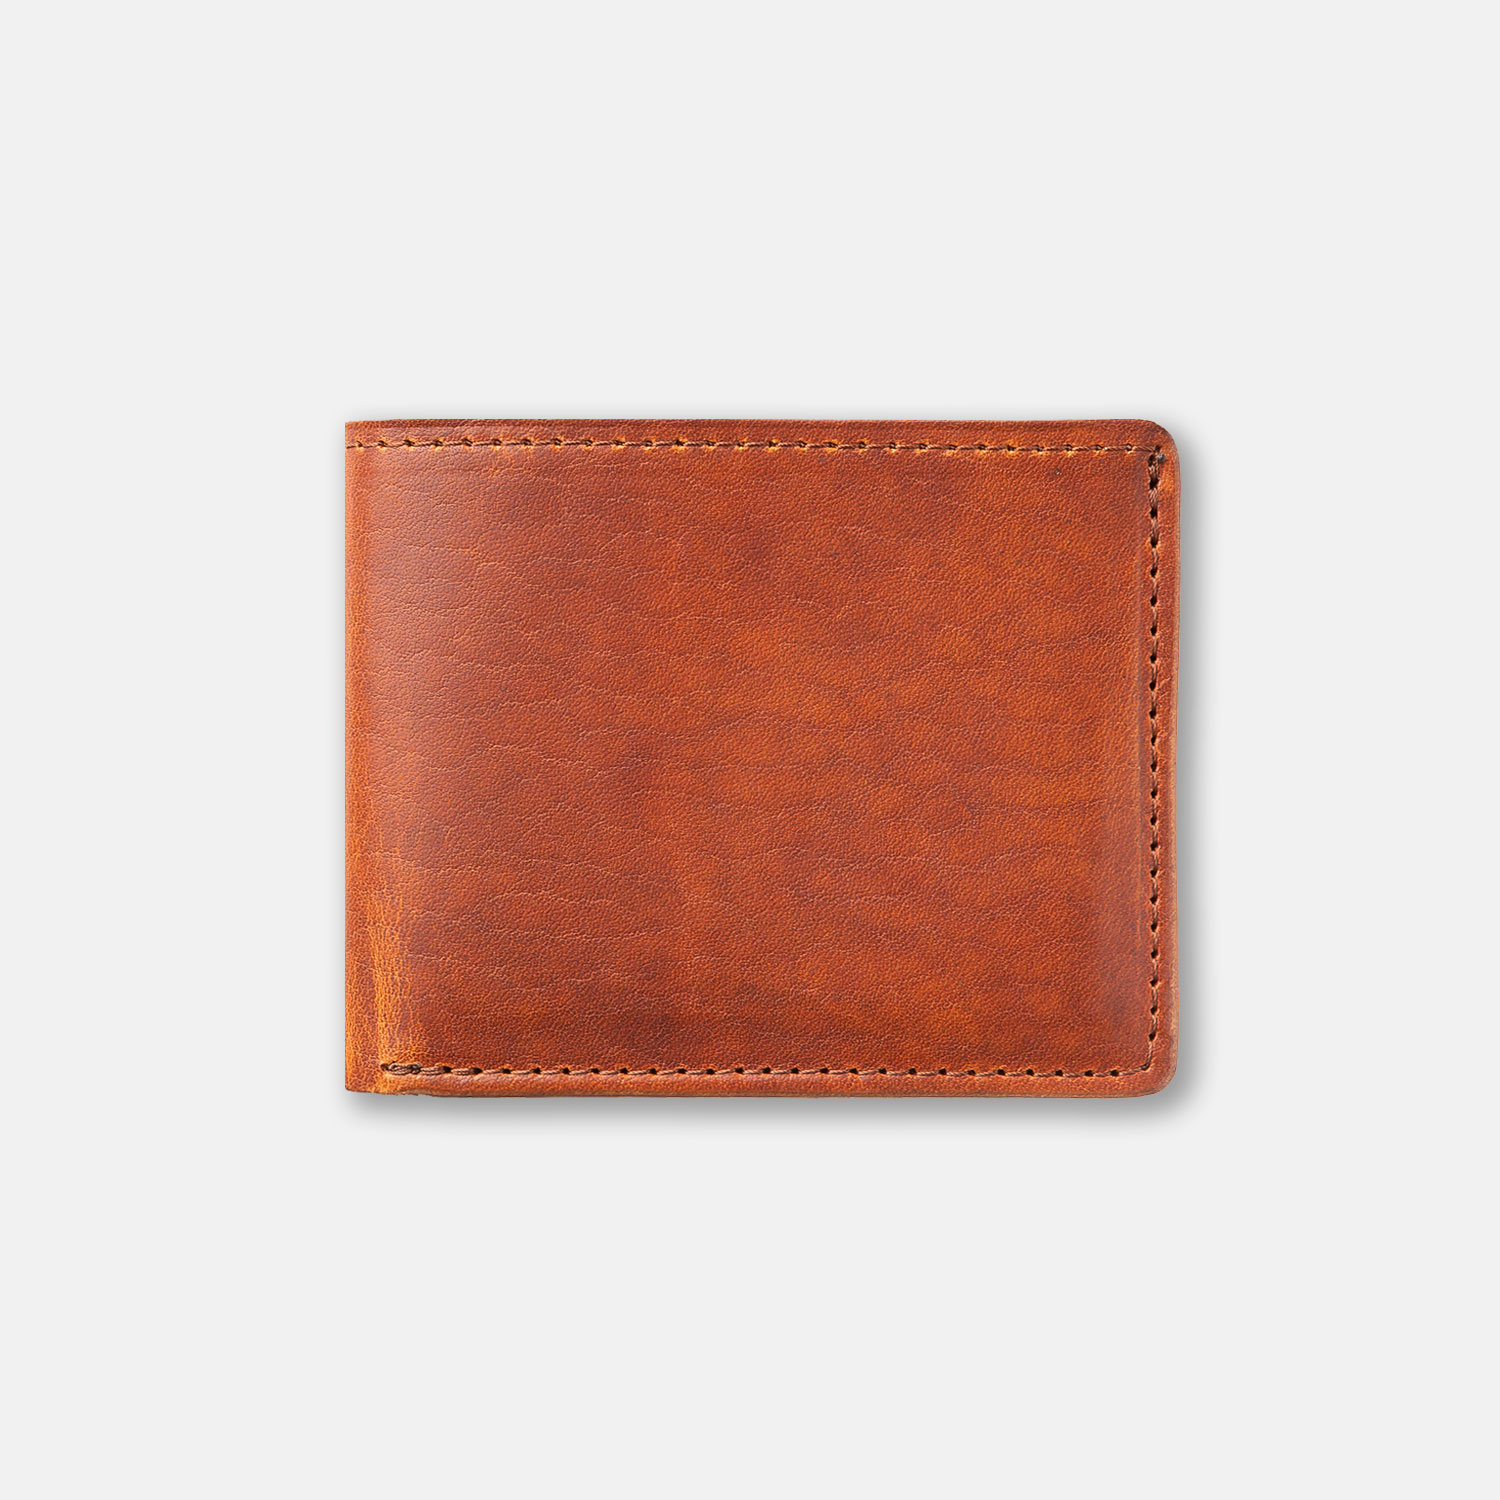 Premium Colombian Handmade Leather Goods Guaranteed For Life – LAND Leather  Goods